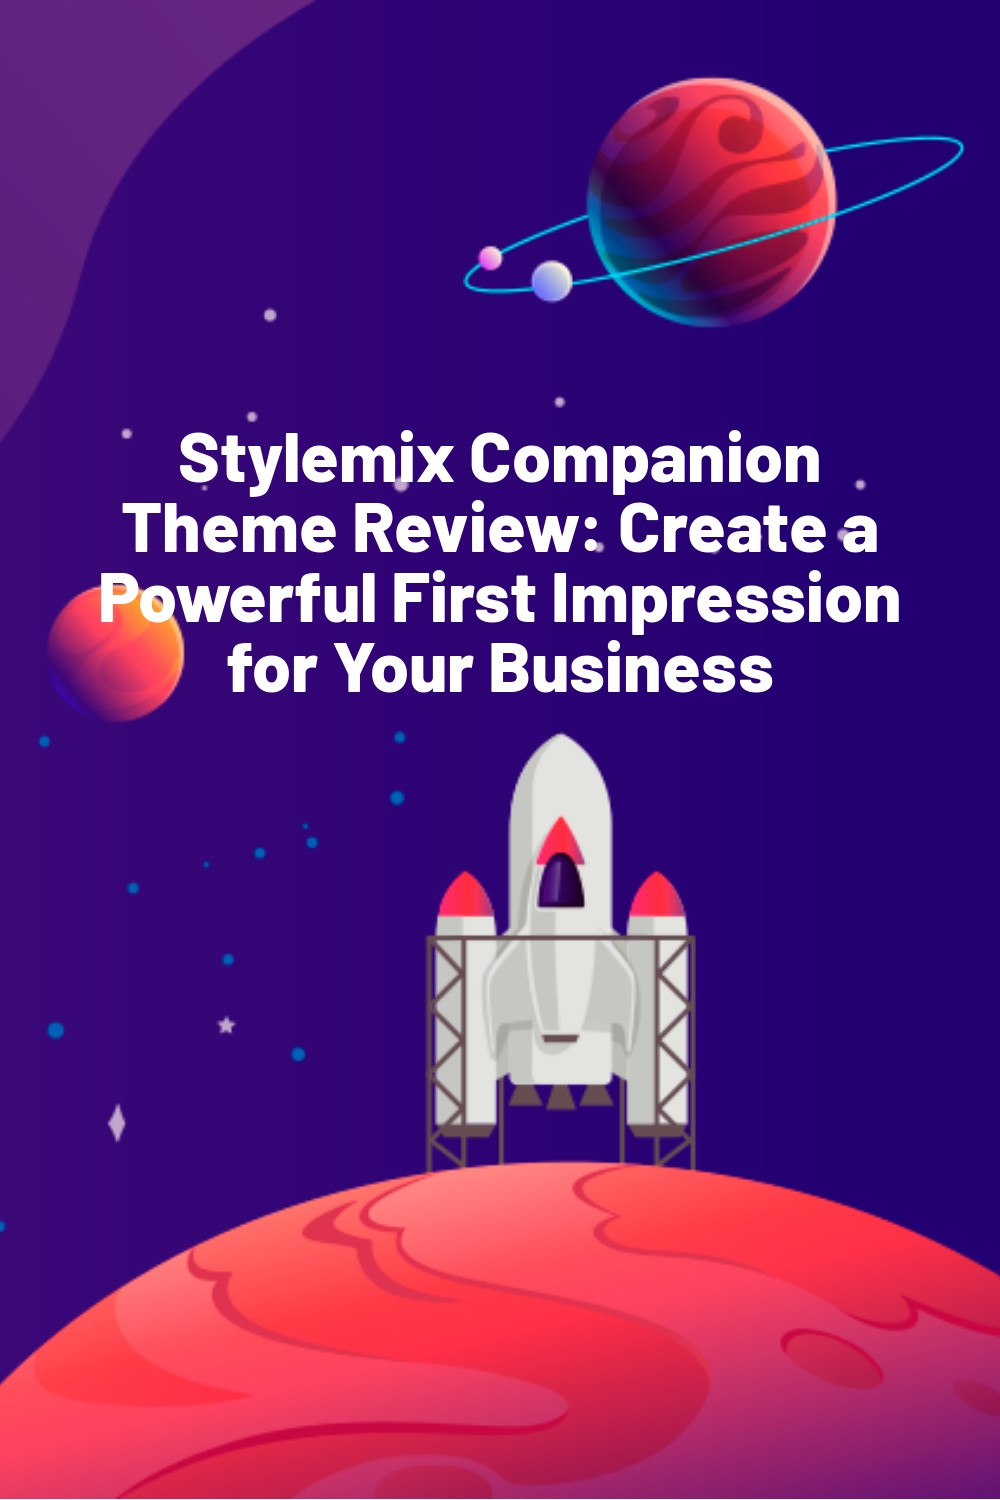 Stylemix Companion Theme Review: Create a Powerful First Impression for Your Business